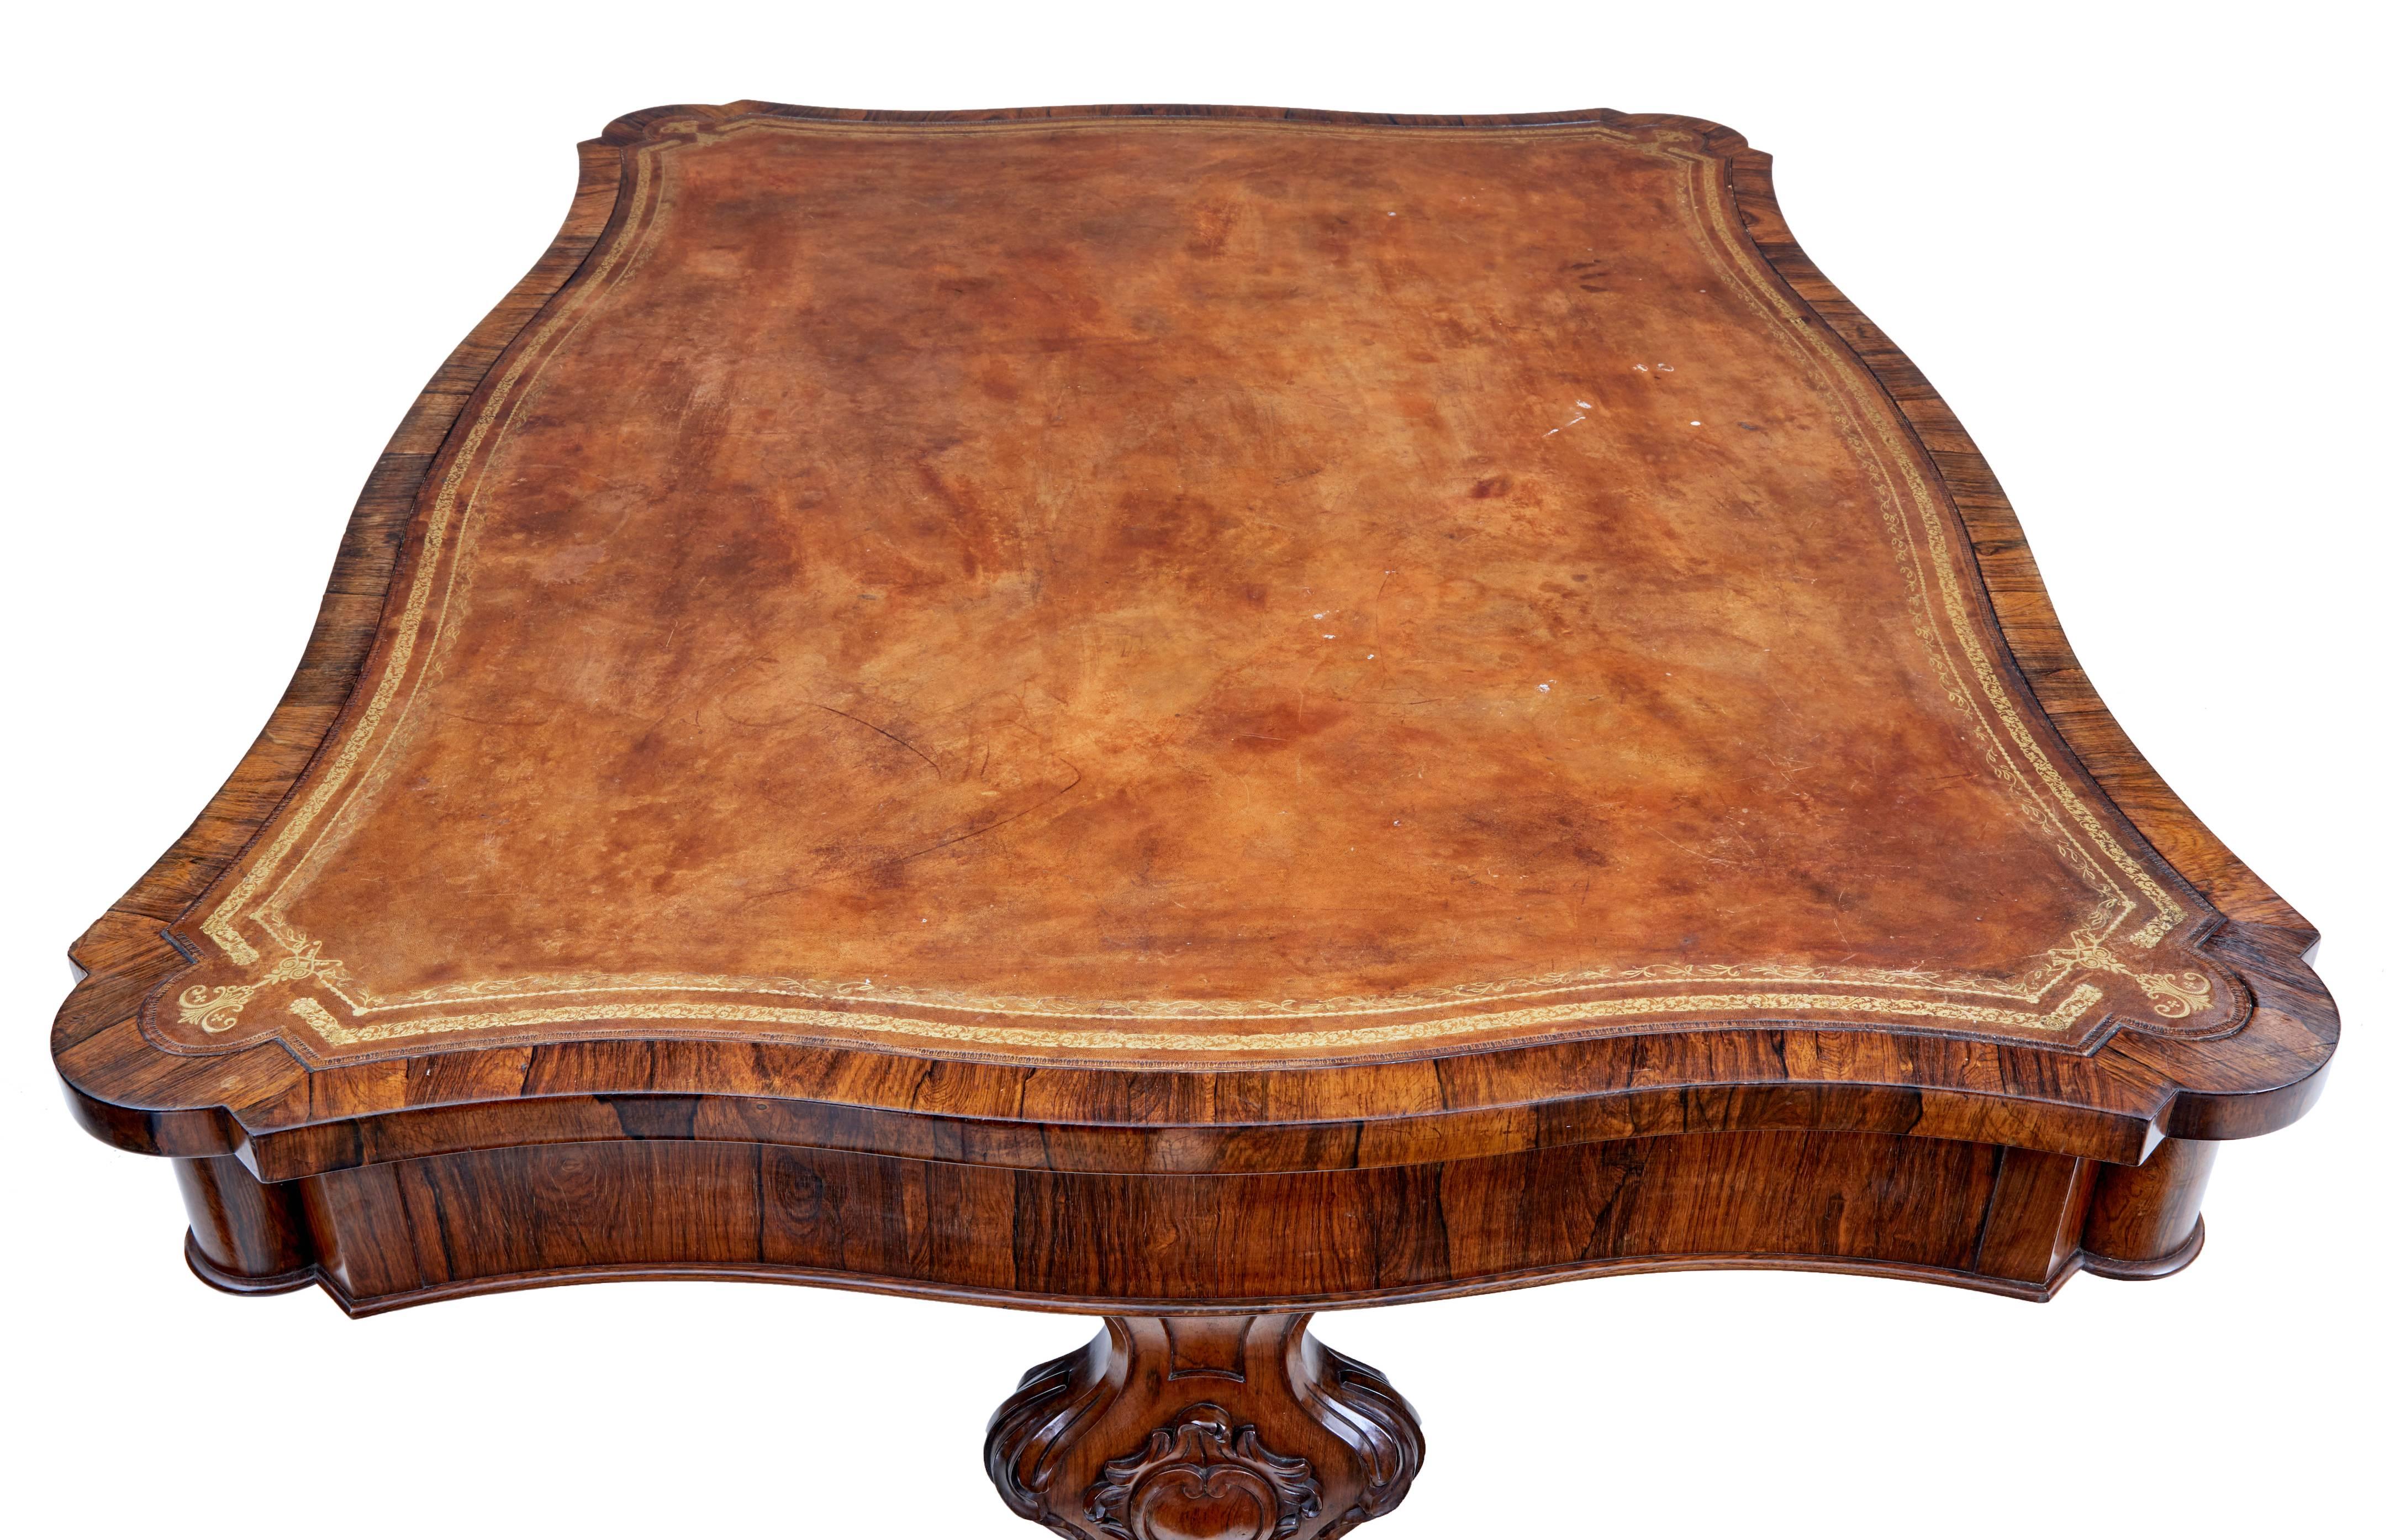 Great Britain (UK) Large 19th Century William iv Rosewood Library Table Attributed to Gillows